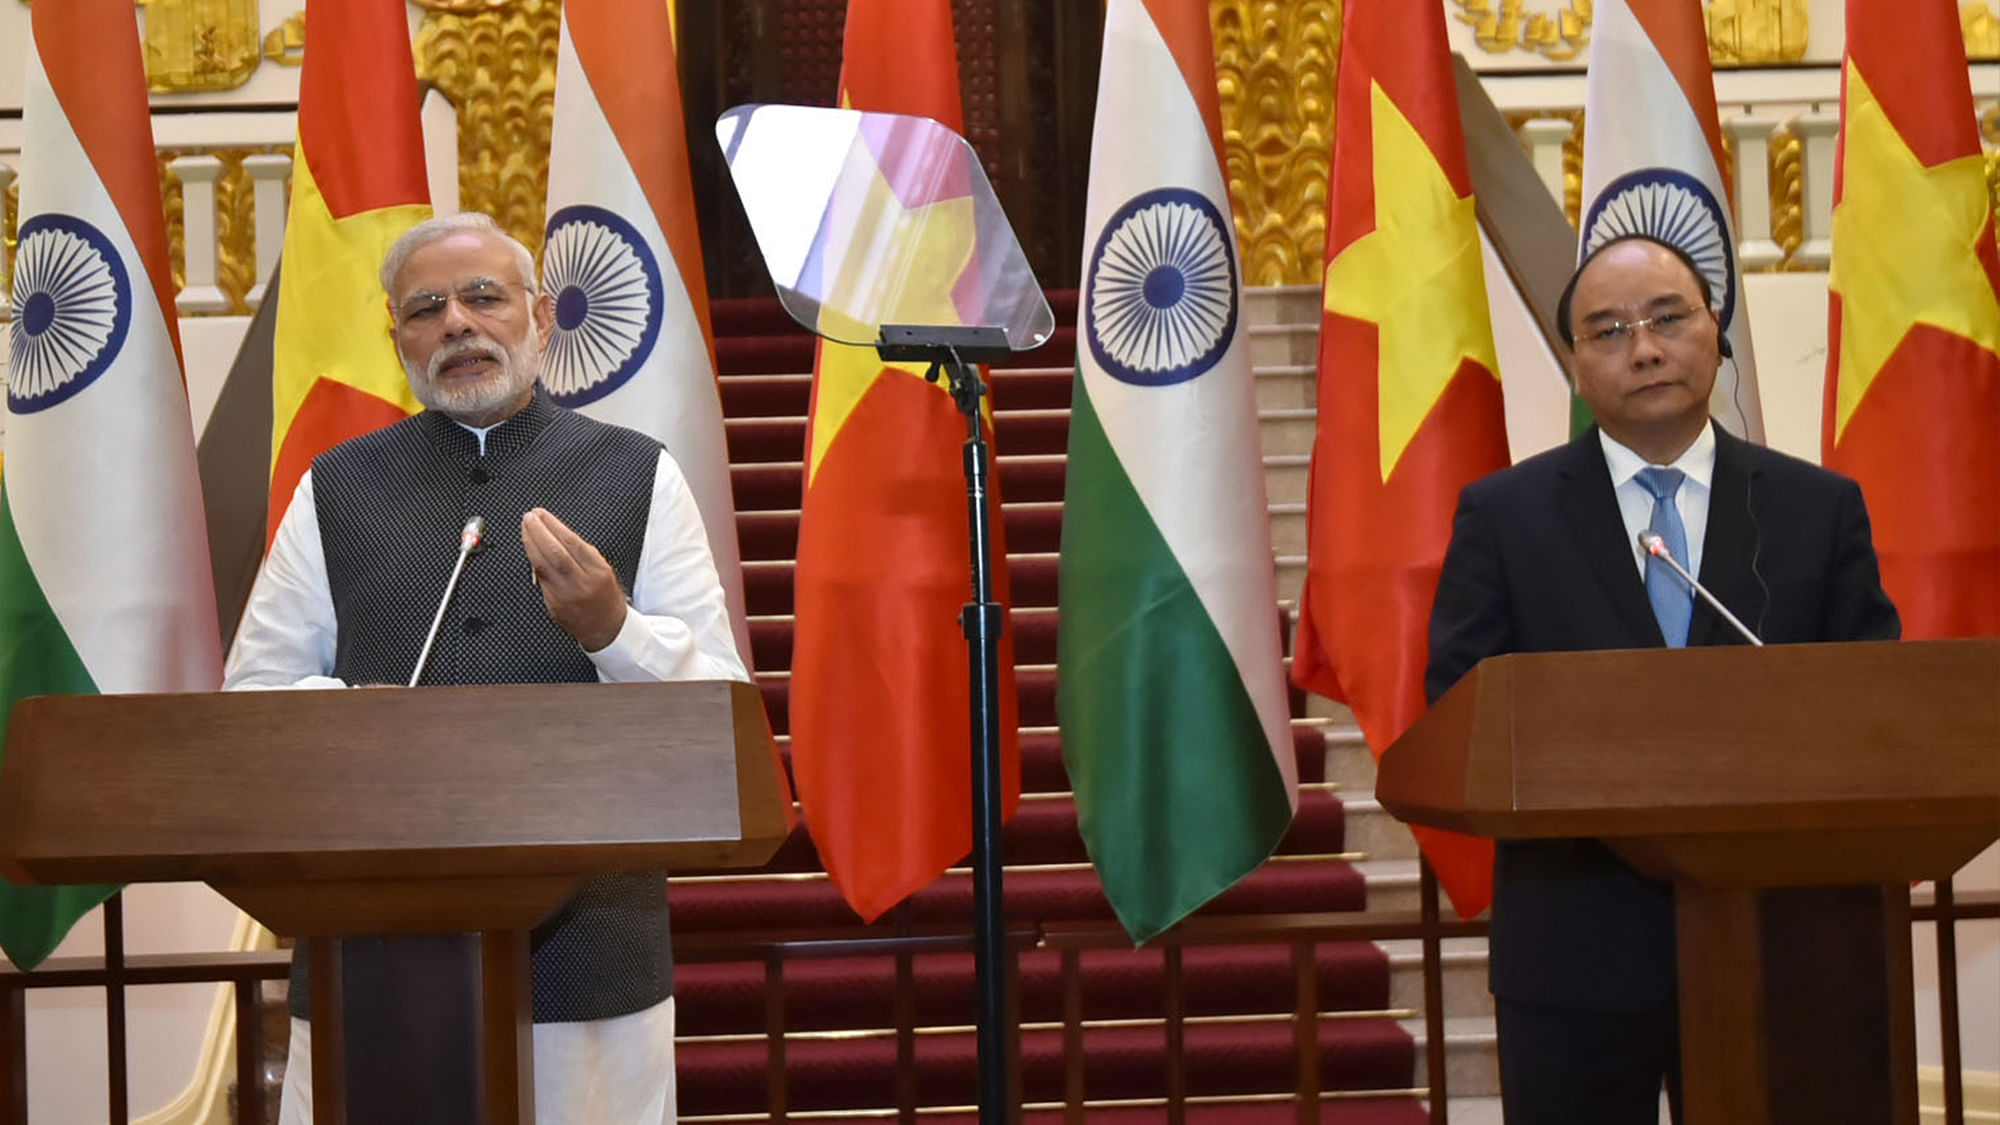 Prime Minister Narendra Modi and the Prime Minister of Socialist Republic of Vietnam, Nguyen Xuan Phuc at the joint media briefing, in Hanoi, Vietnam on Saturday. (Photo: IANS)